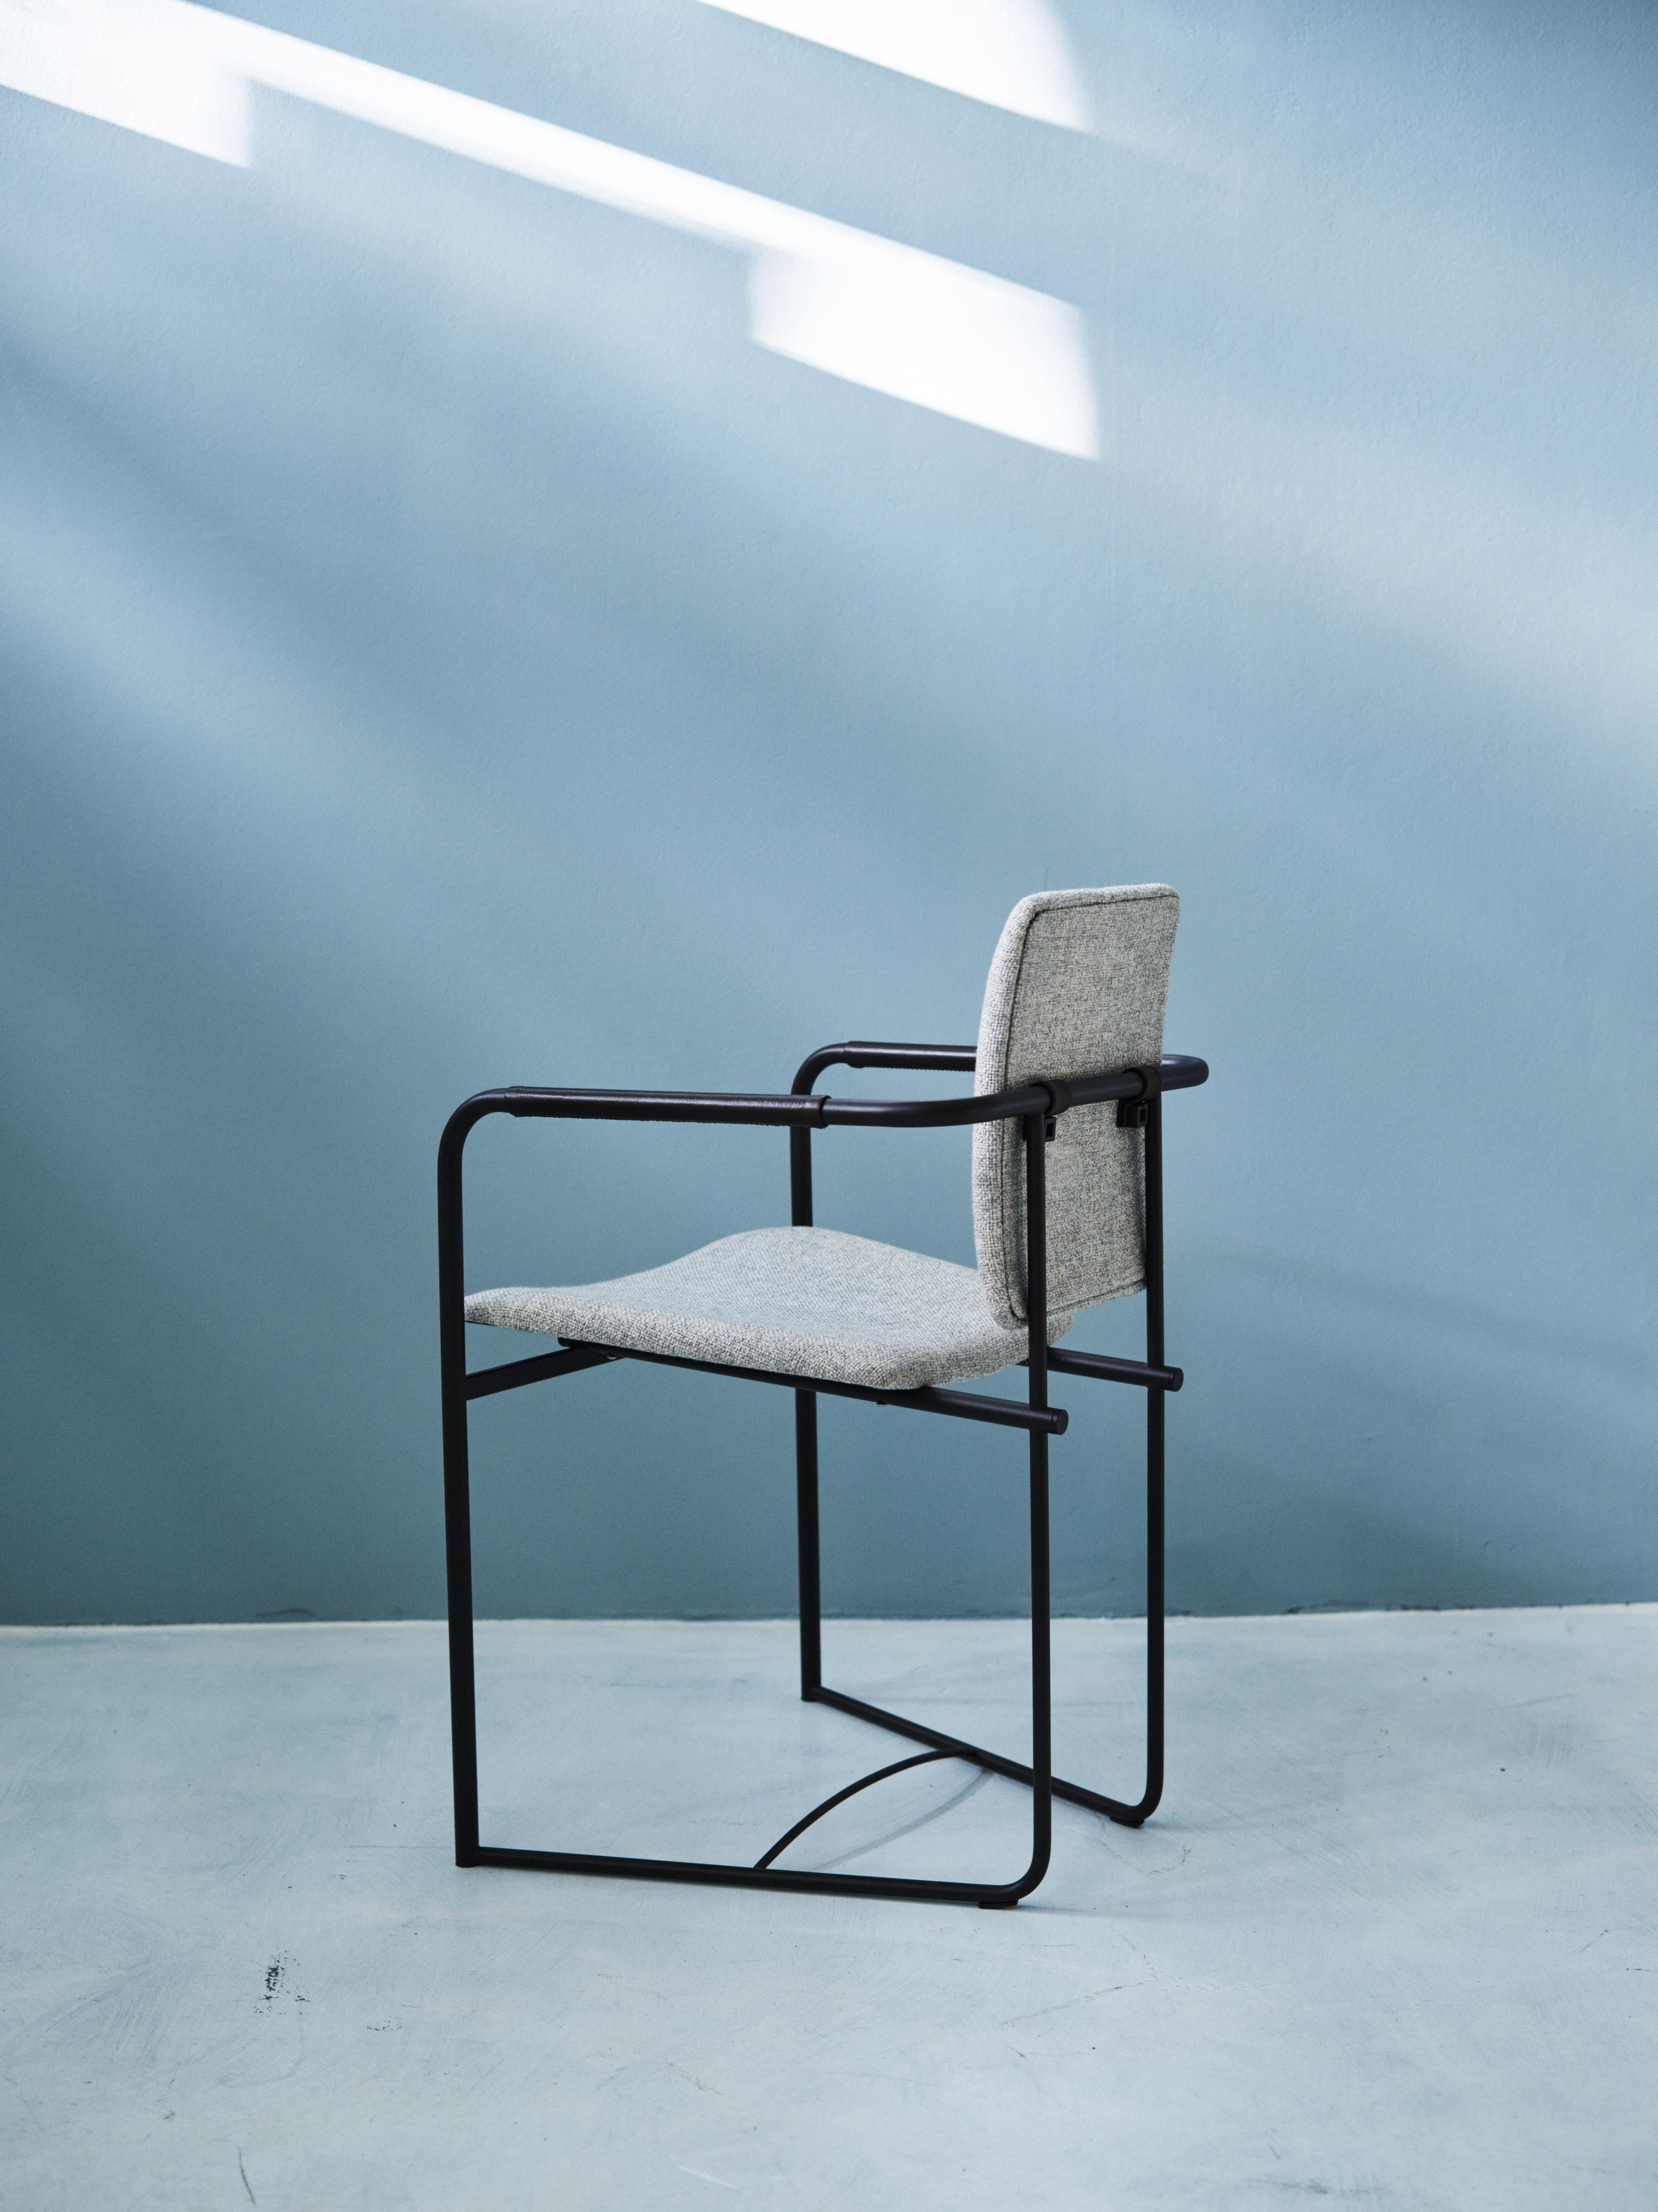 The Faye SO2+ armchair was designed by Peter Ghyczy and hand-crafted in the GHYCZY atelier in 2017. The Faye S02+ armchair is based on the original Jodie SO2 design from 1986, which has remained a highly acclaimed GHYCZY design since coming on the